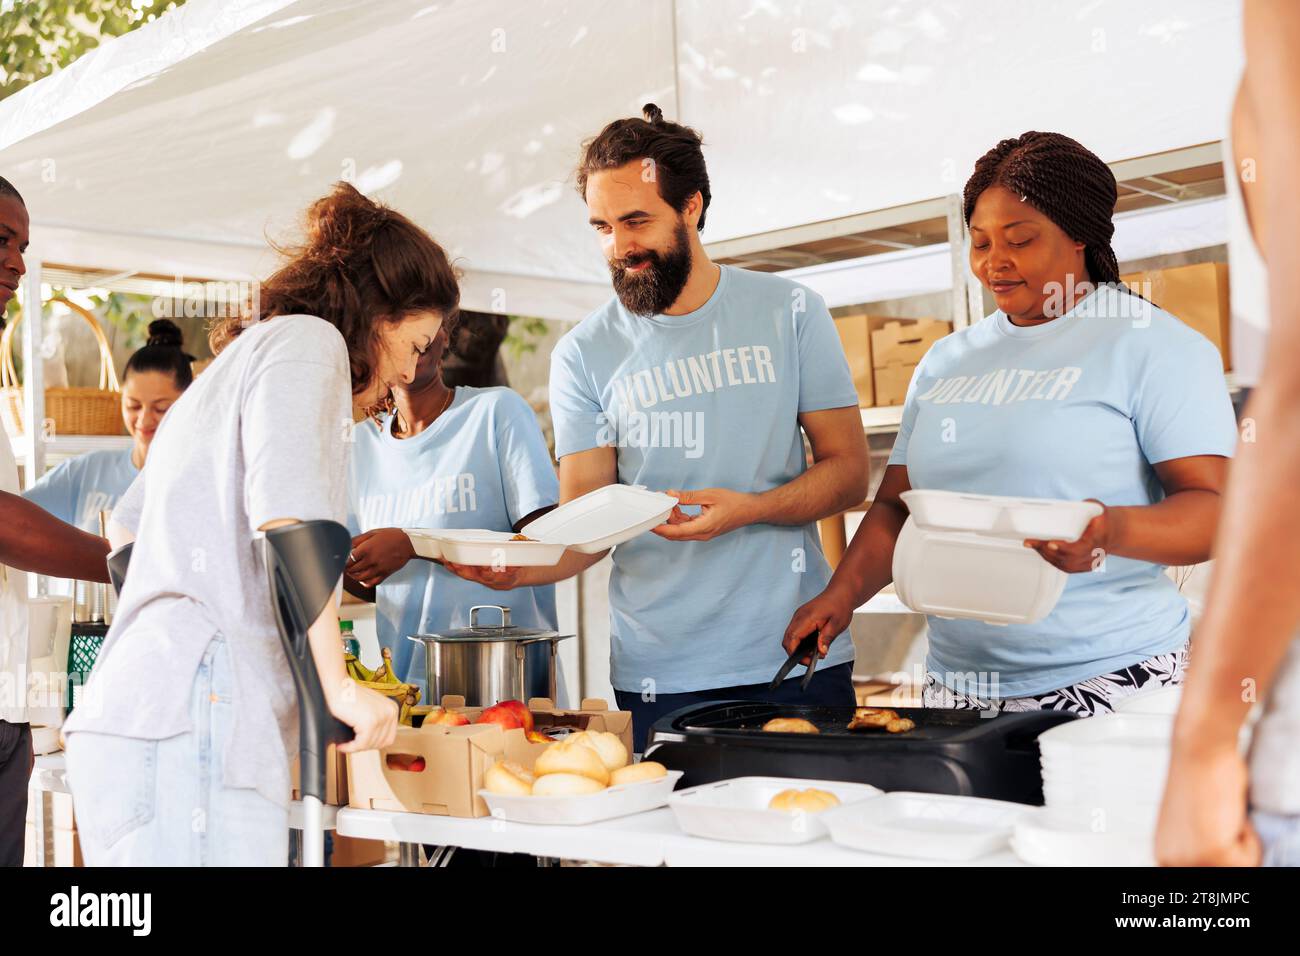 Voluntary individuals helping disabled and homeless people with food and resources. Young people wearing blue t-shirt, display compassion by providing support to the needy and underprivileged. Stock Photo